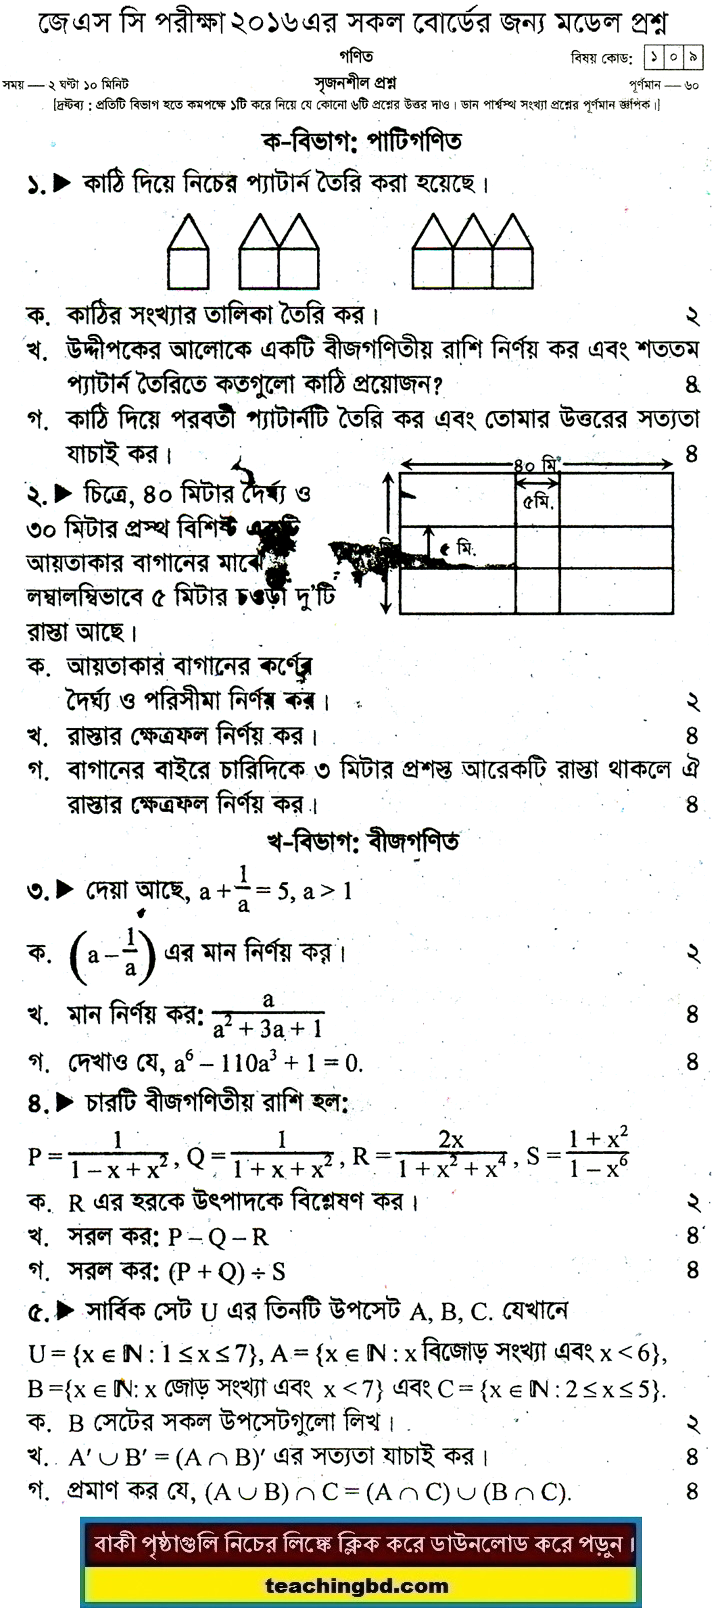 Mathematics Suggestion and Question Patterns of JSC Examination 2016-4